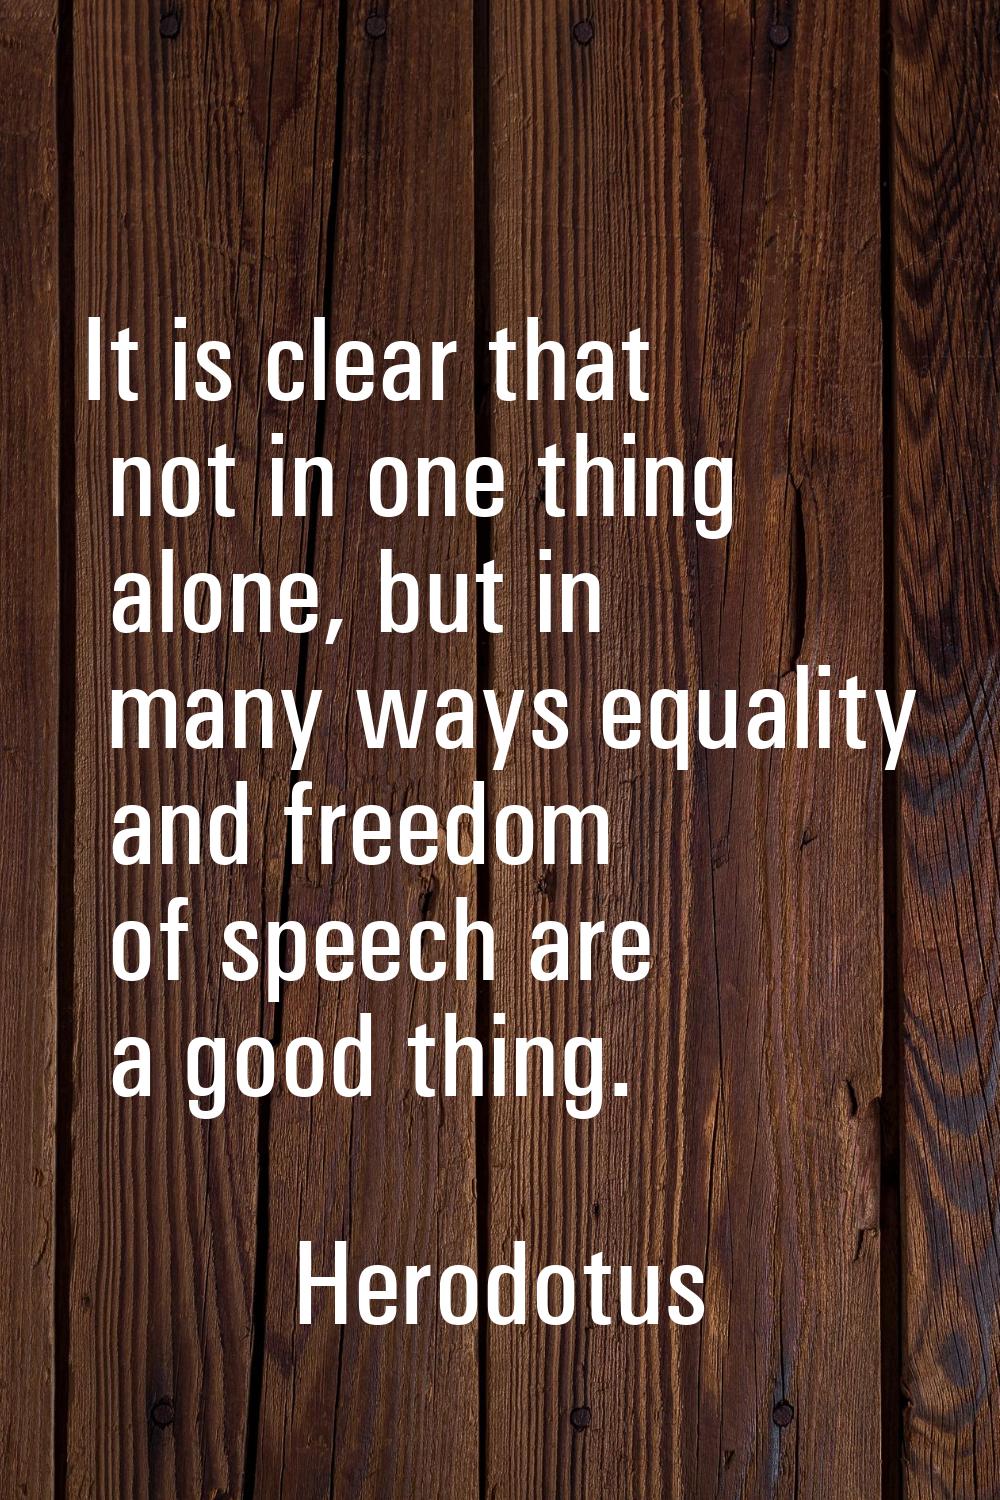 It is clear that not in one thing alone, but in many ways equality and freedom of speech are a good